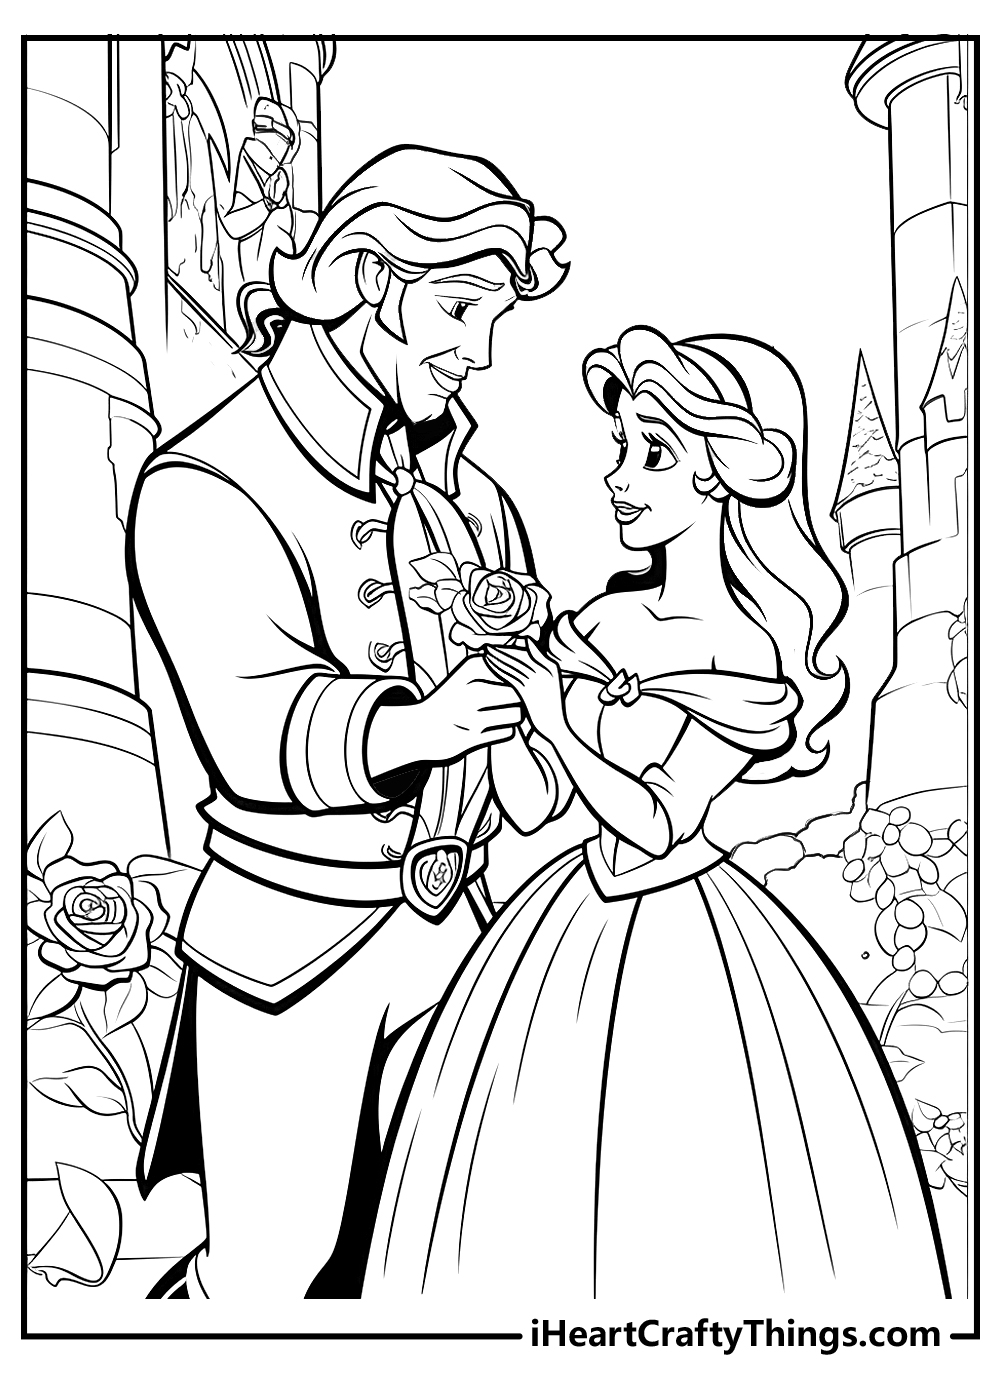 beauty and the beast coloring sheet free download